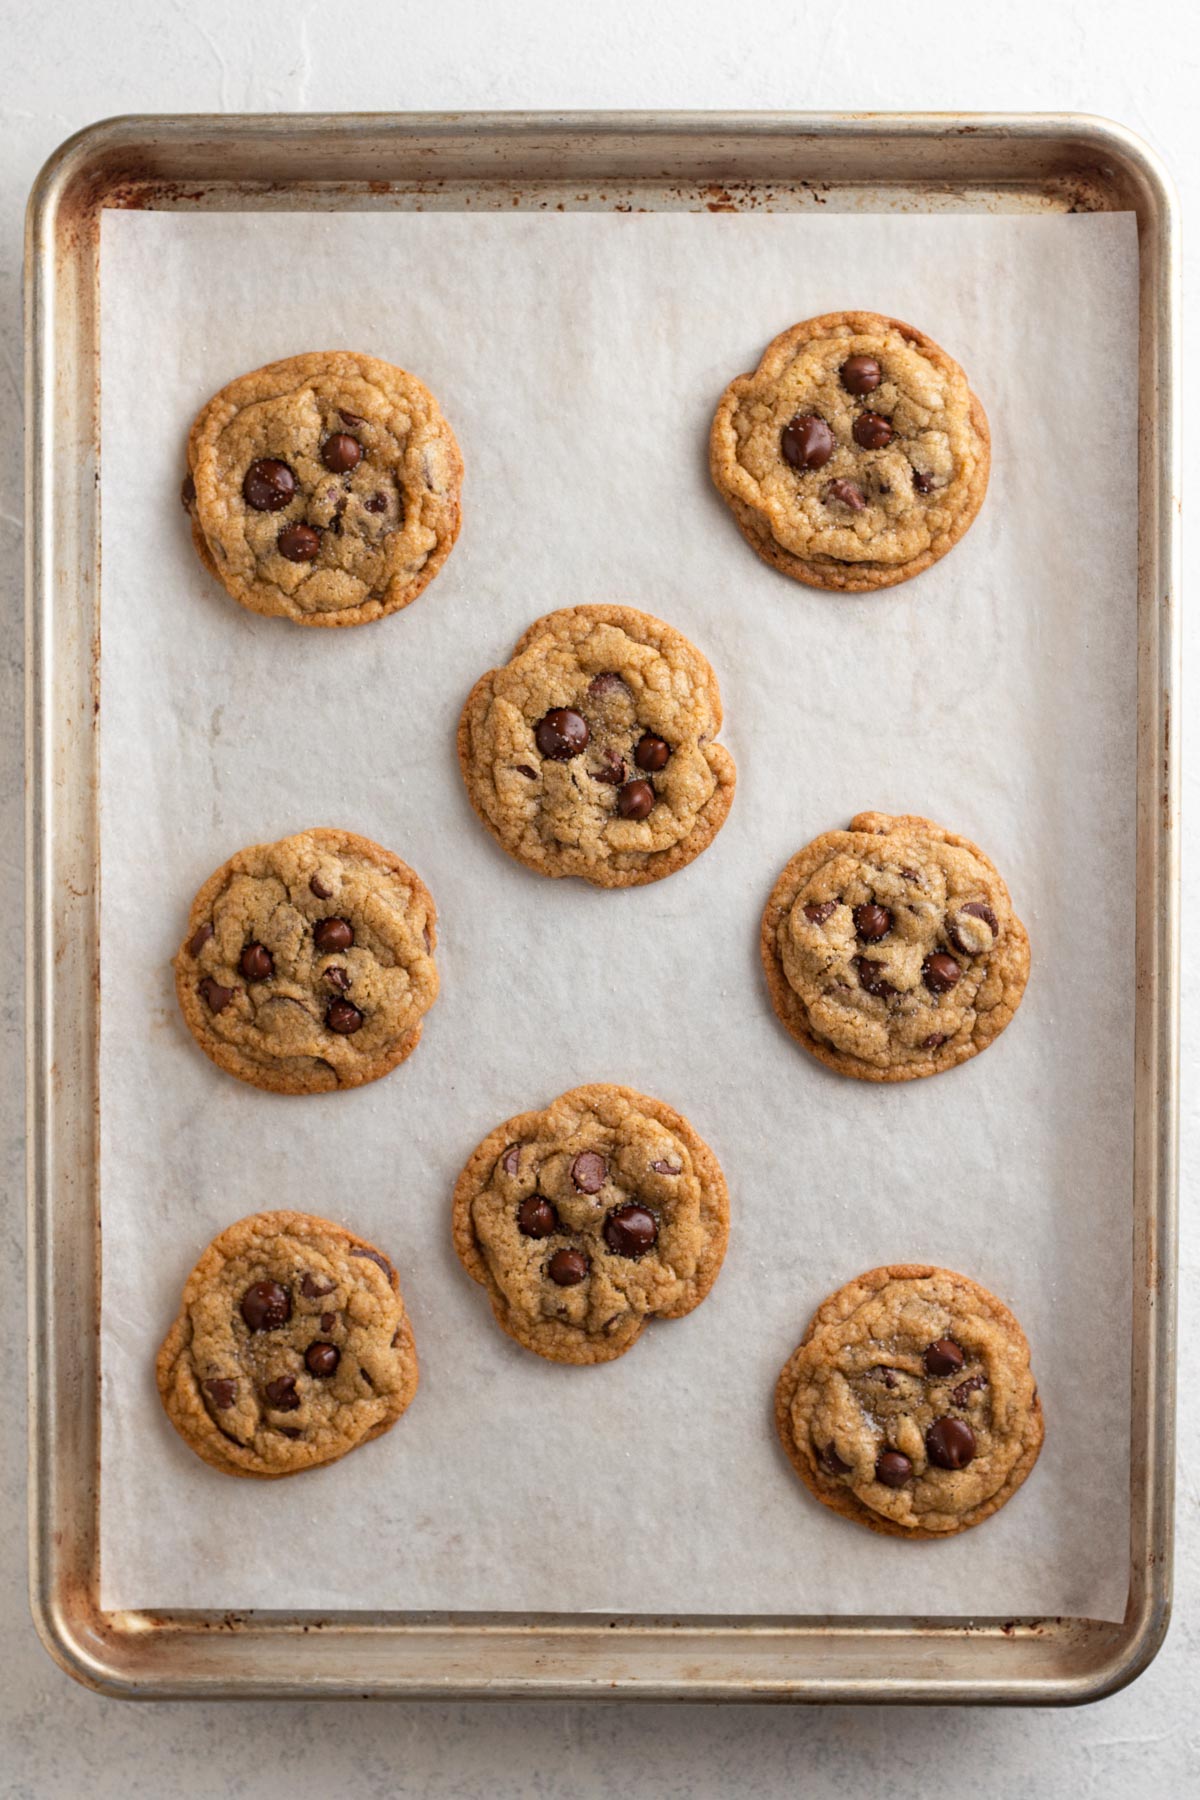 Baked cookies with extra chocolate chips pressed into the tops on a baking sheet.